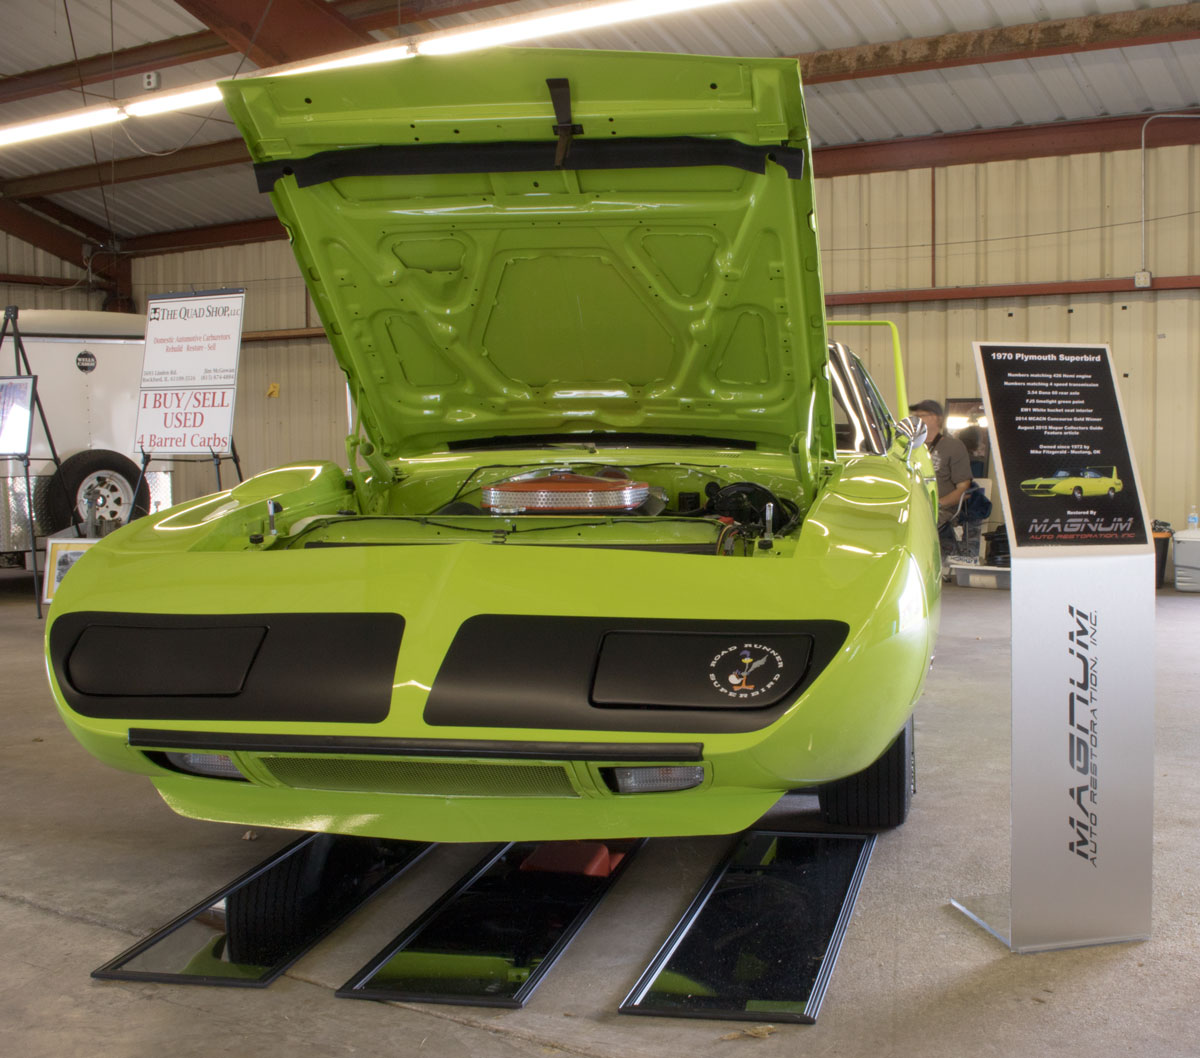 New Concourse Display Sign for a 1970 Plymouth Super Bird'